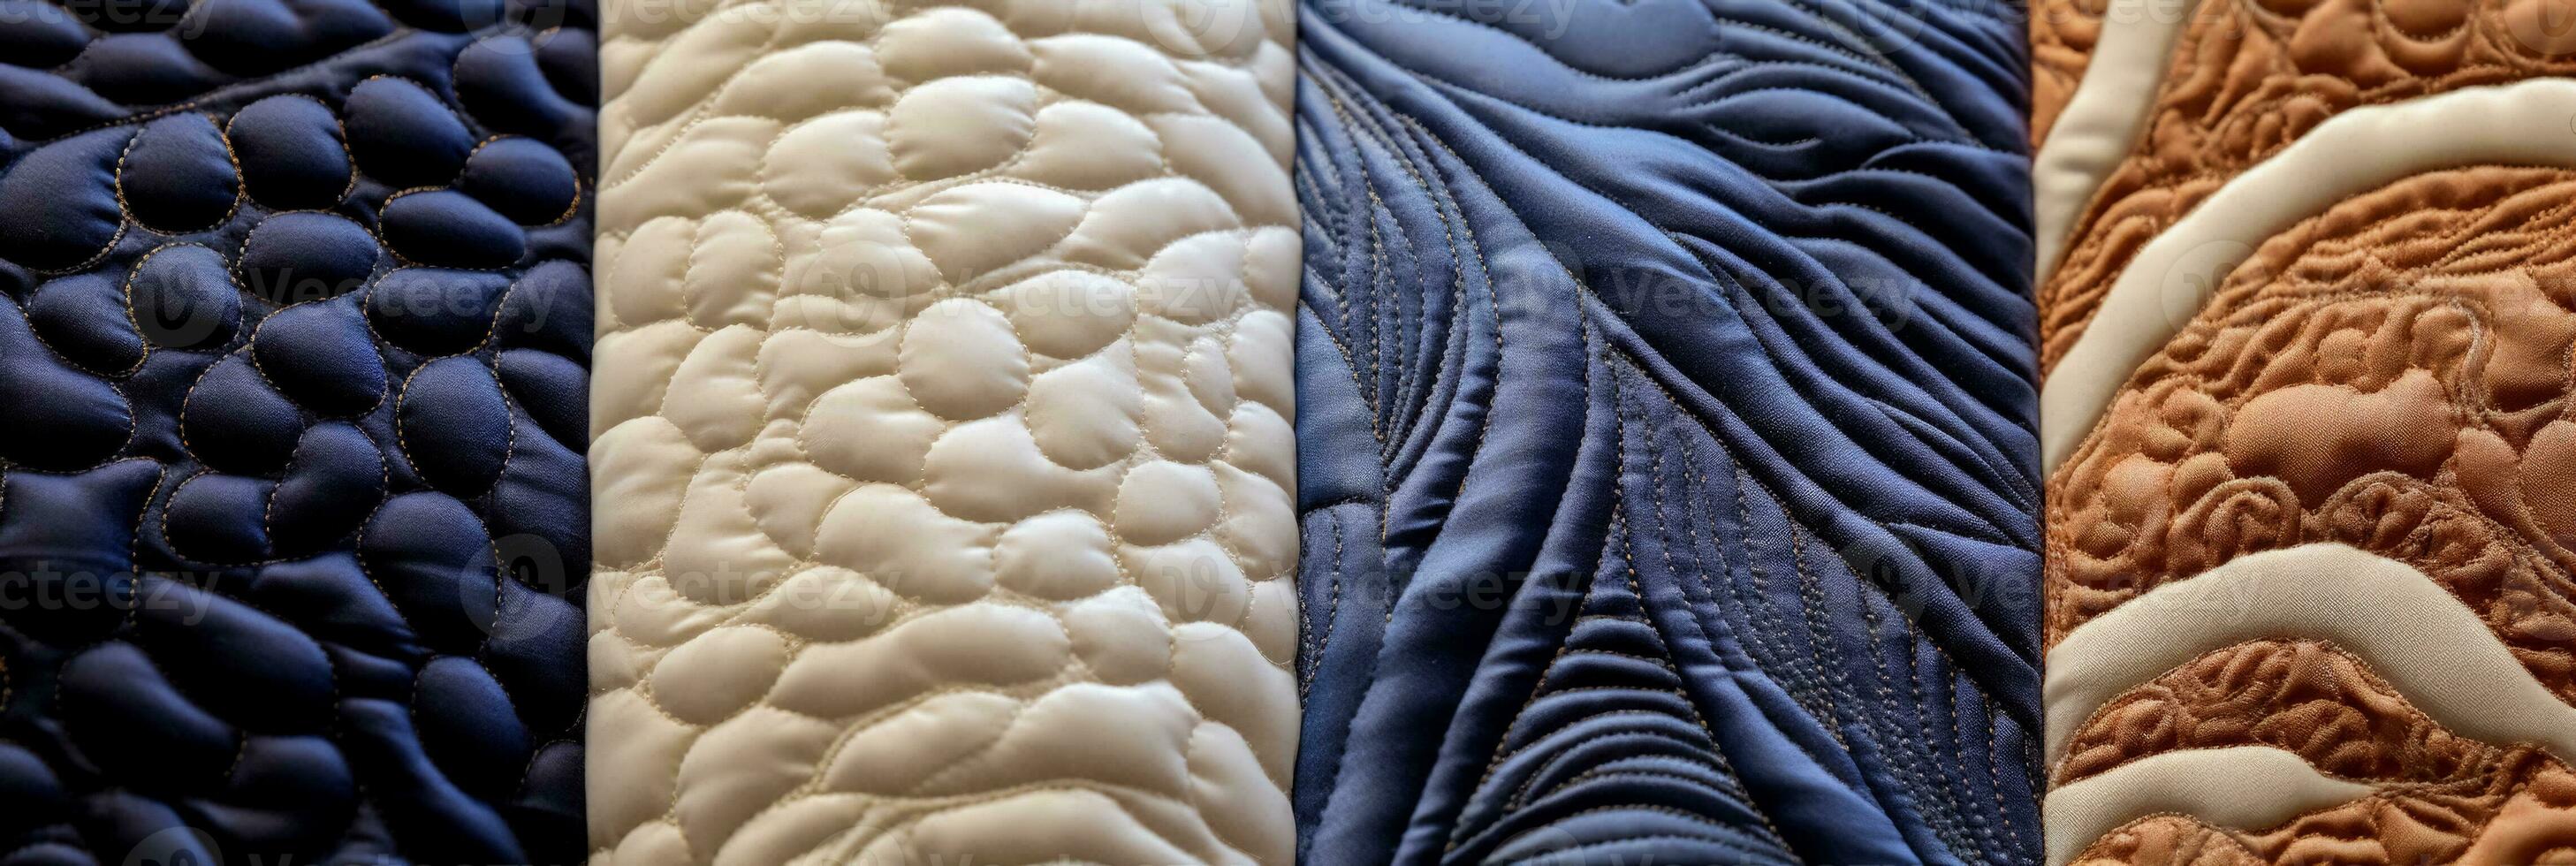 Extreme close ups capturing the intricate patterns of textural quilting on textiles photo